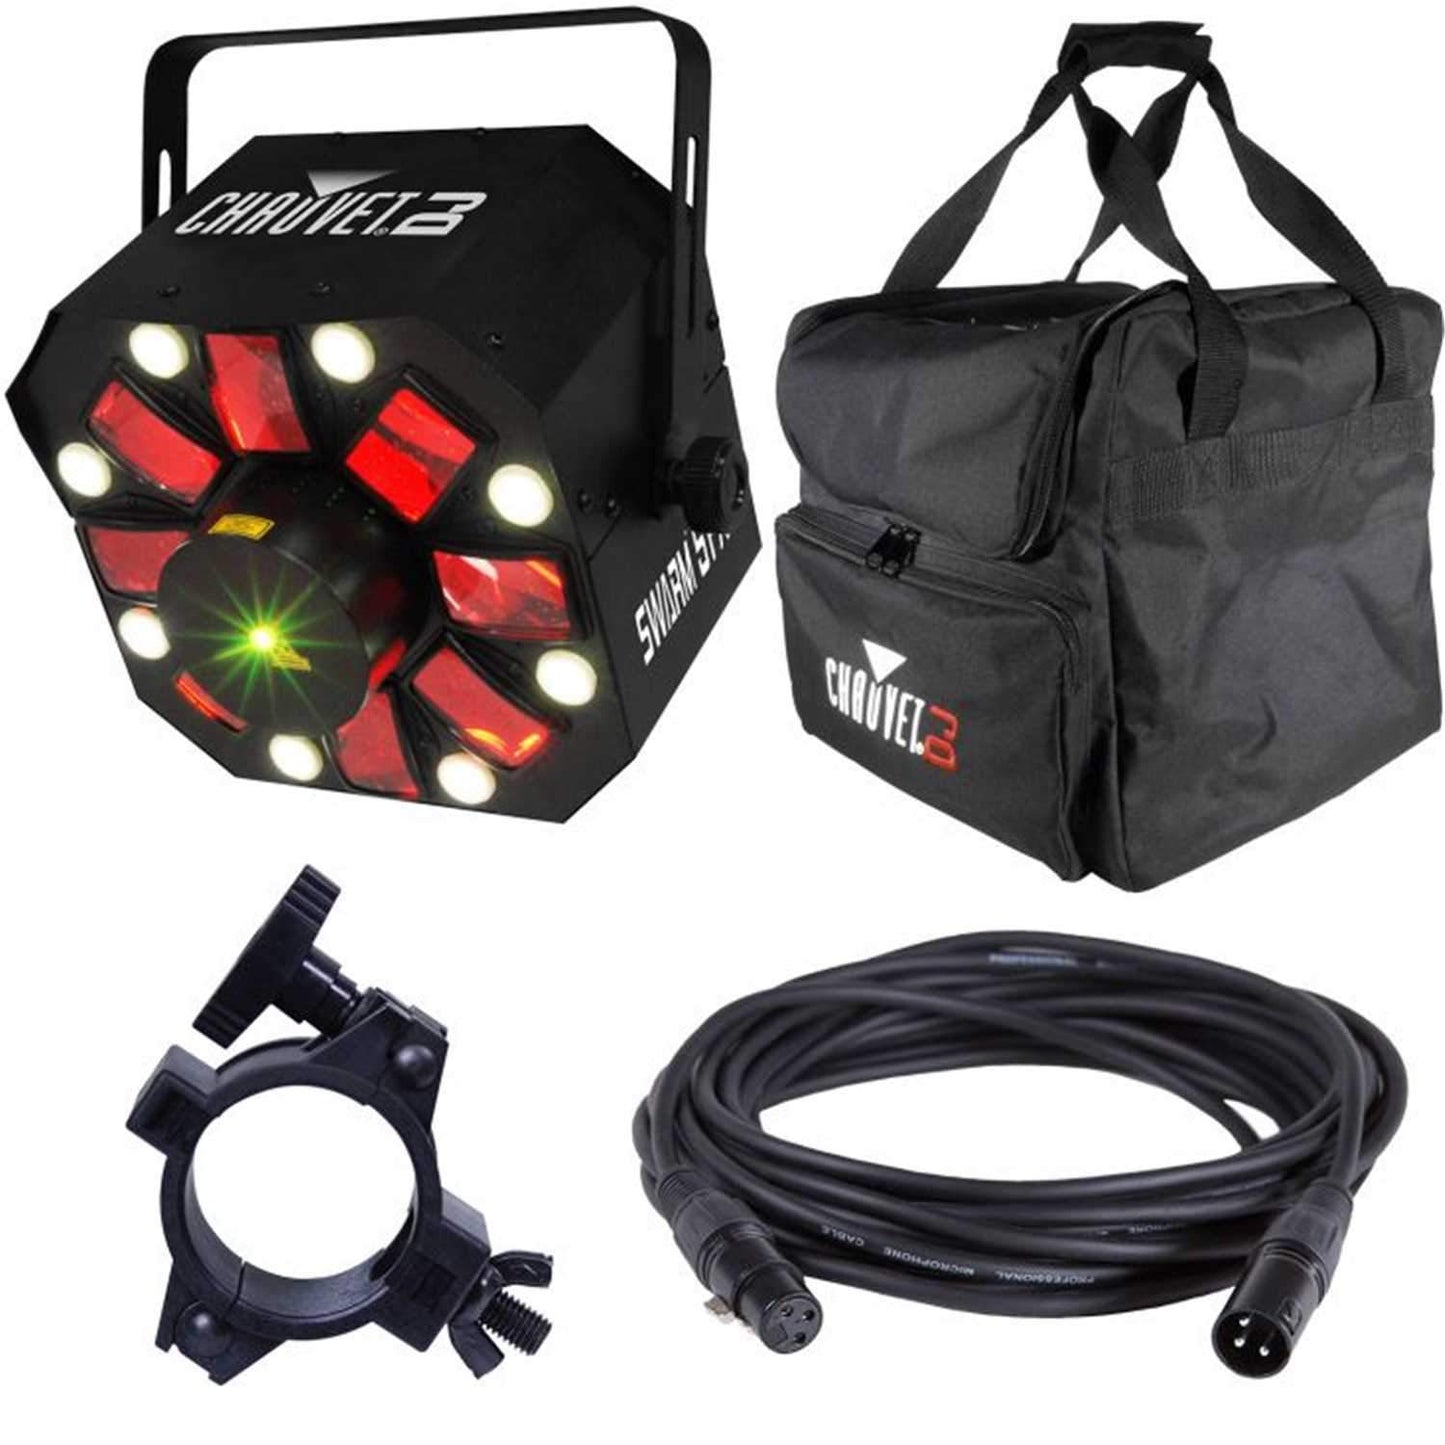 Chauvet Swarm 5 FX Light with Accessories & Bag - PSSL ProSound and Stage Lighting